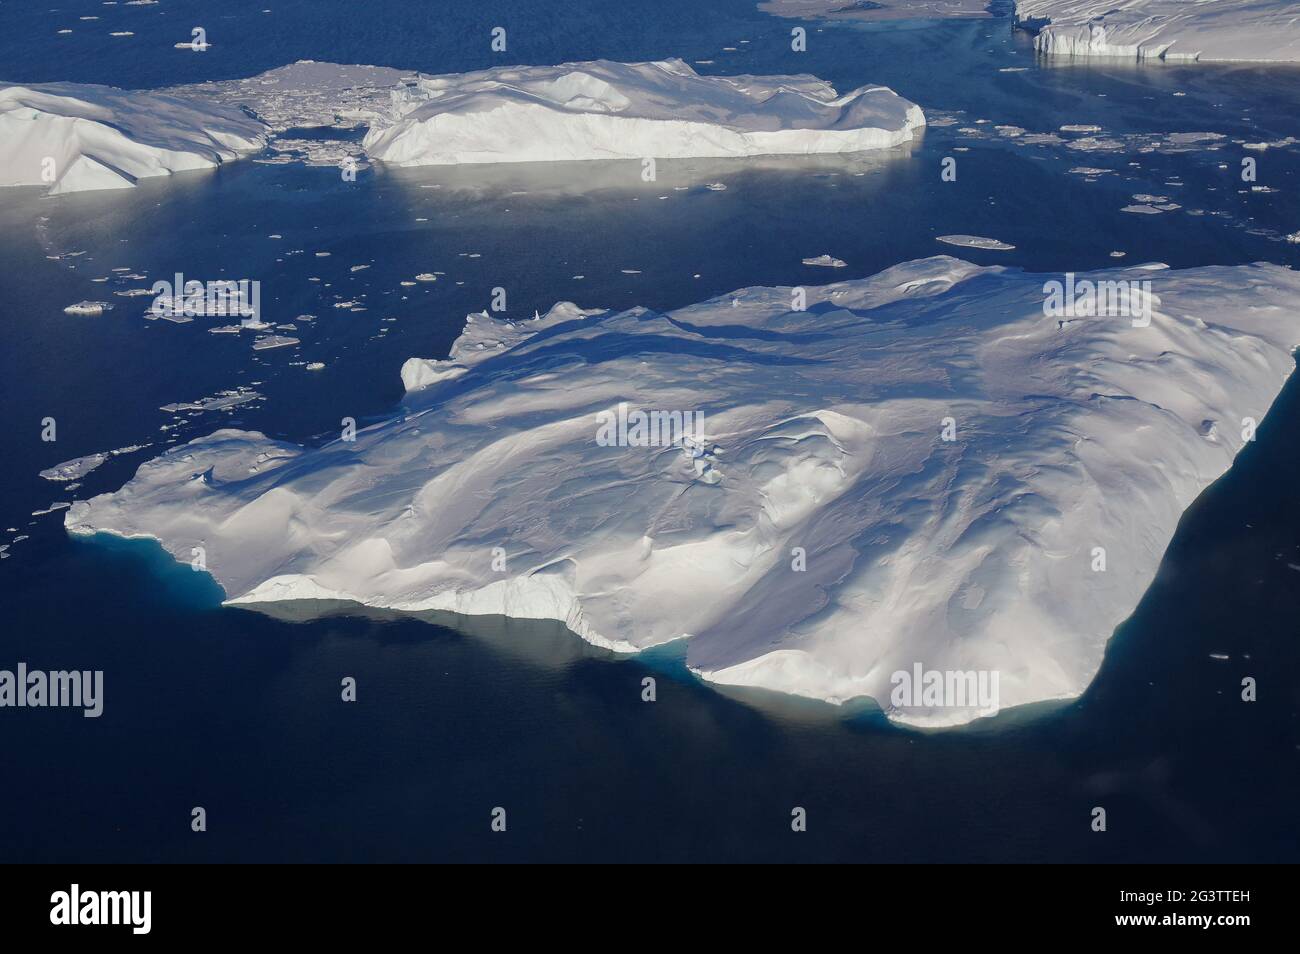 Ilulissat icefjord from above Stock Photo